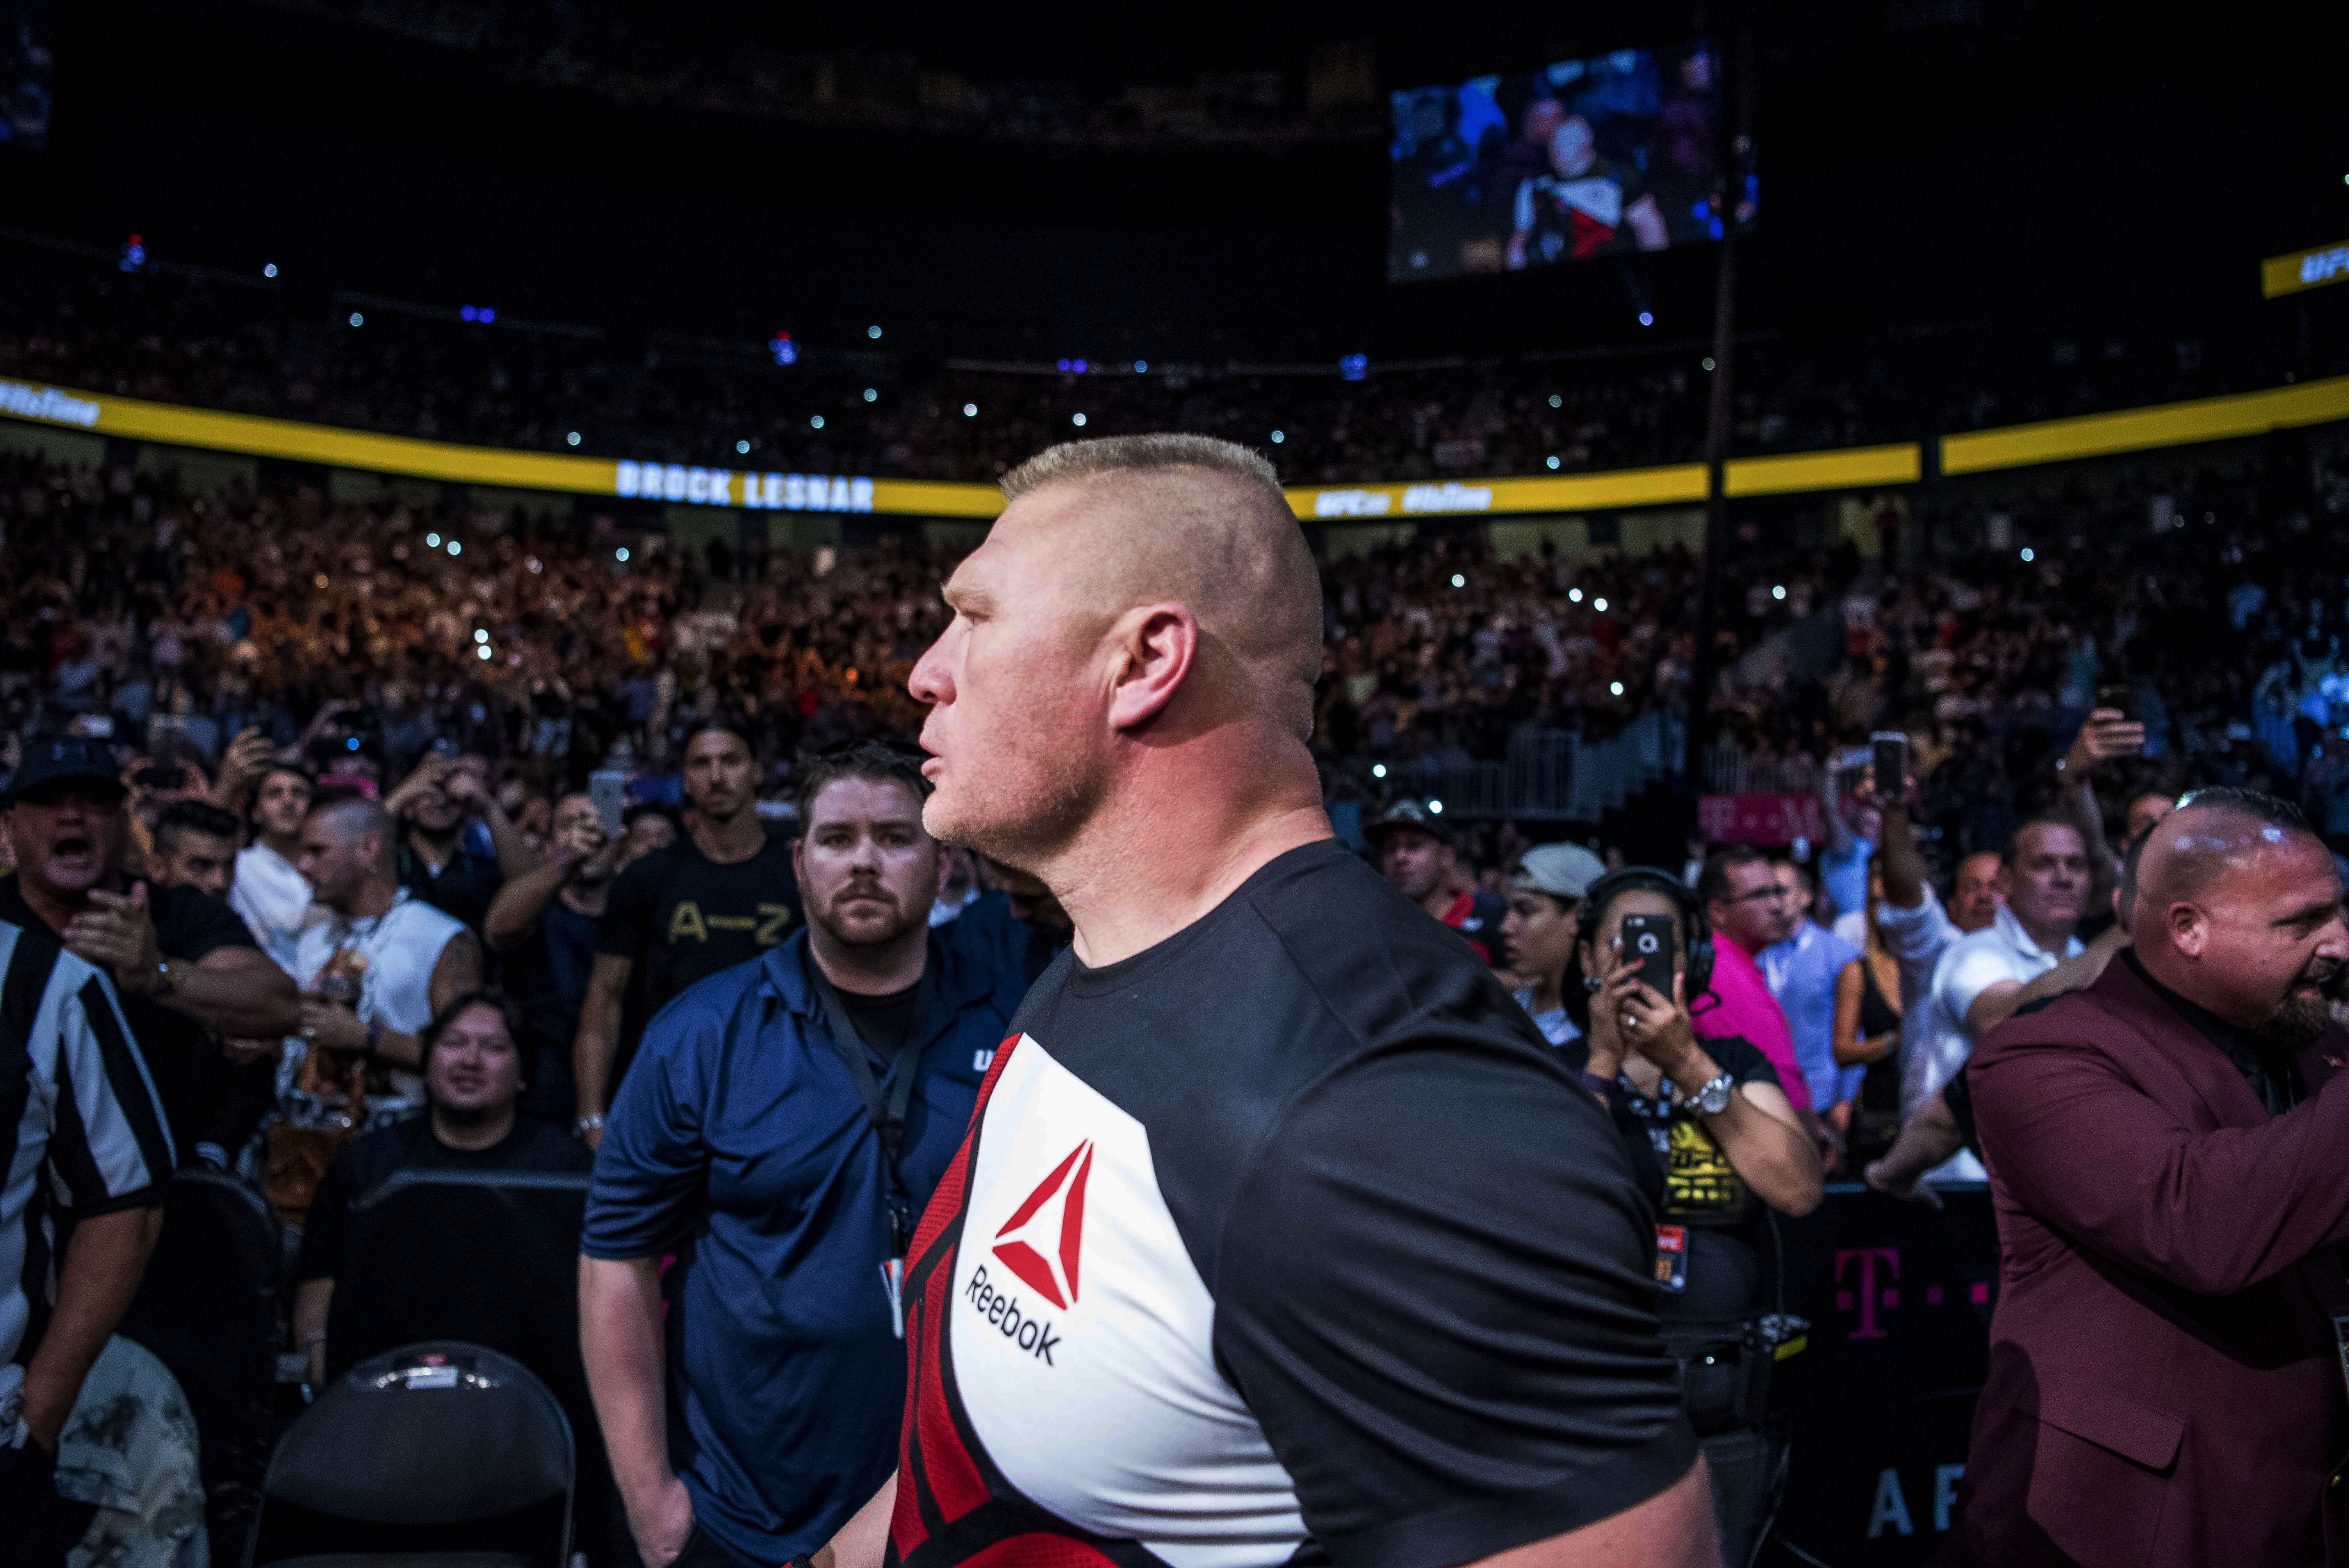 What Does A Temporary Suspension Mean For UFC/WWE Star Brock Lesnar? 2